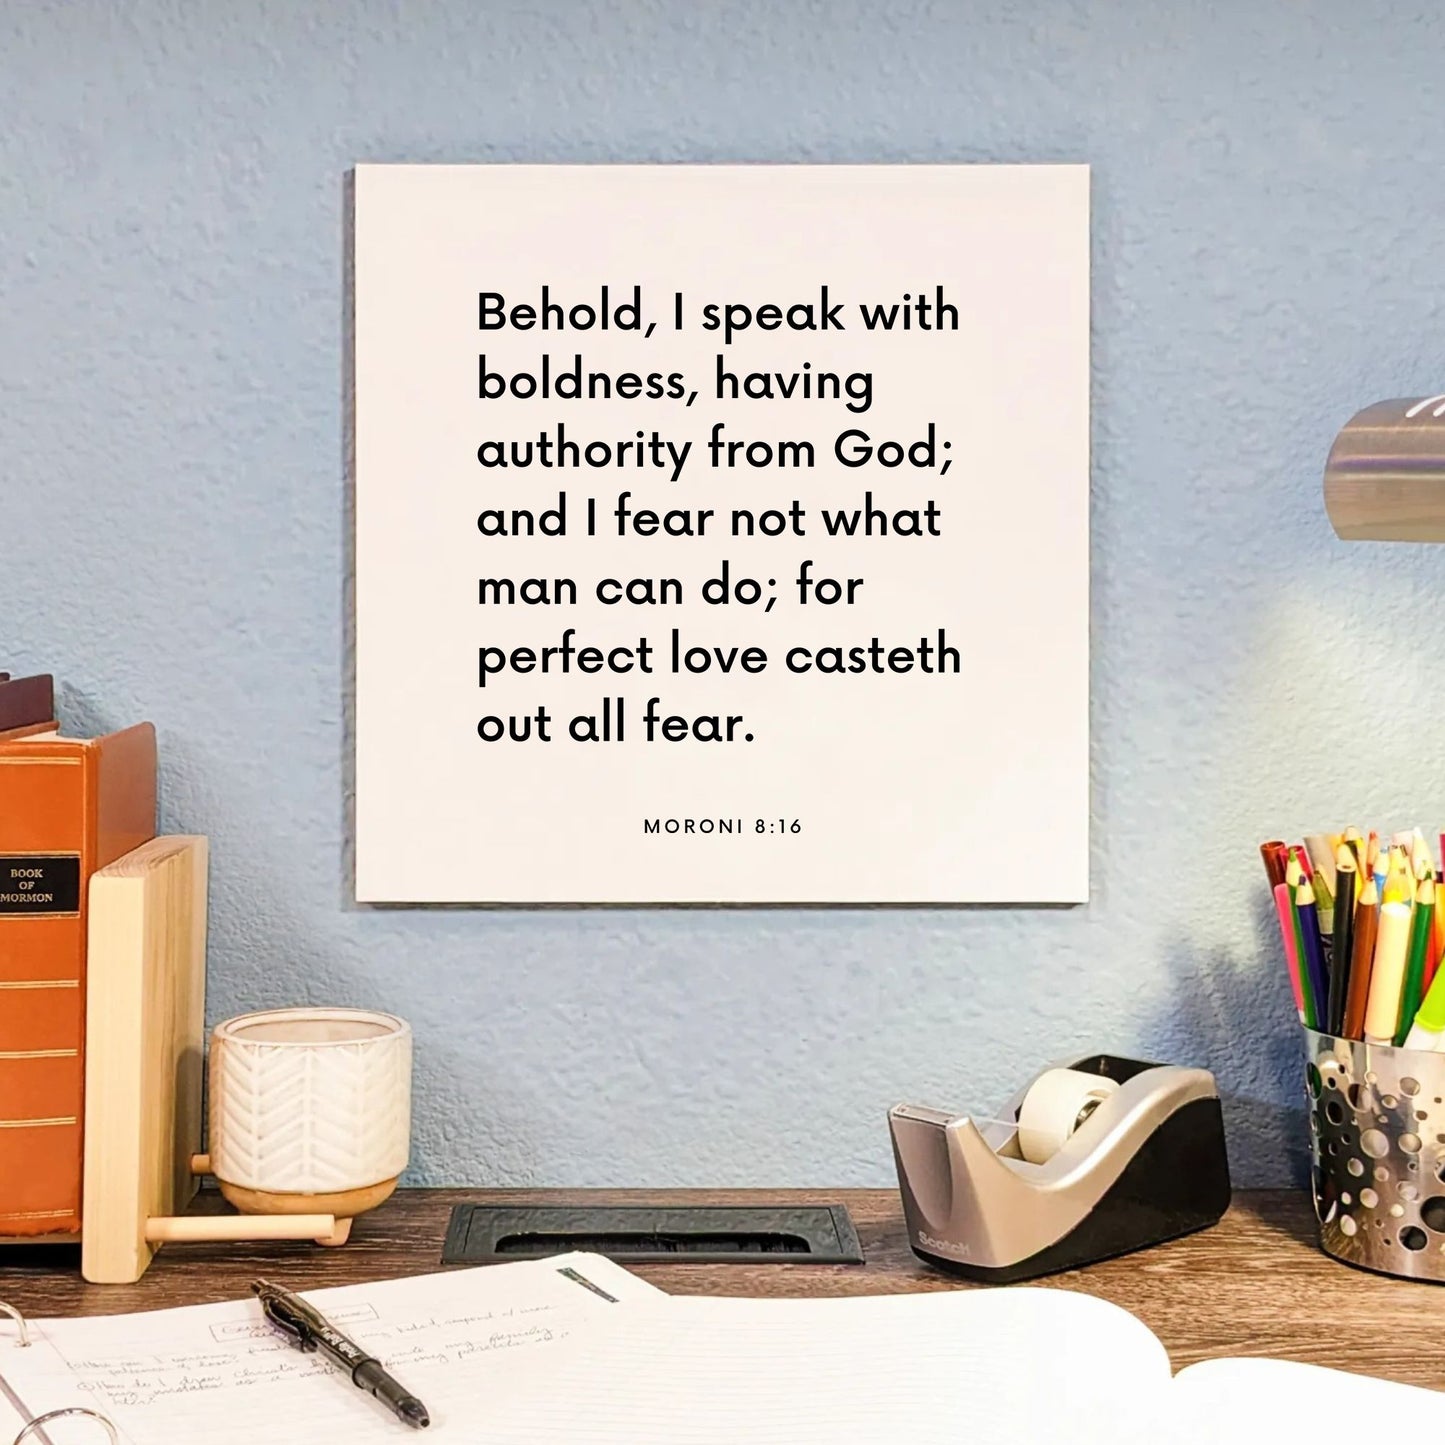 Desk mouting of the scripture tile for Moroni 8:16 - "Behold, I speak with boldness, having authority from God"